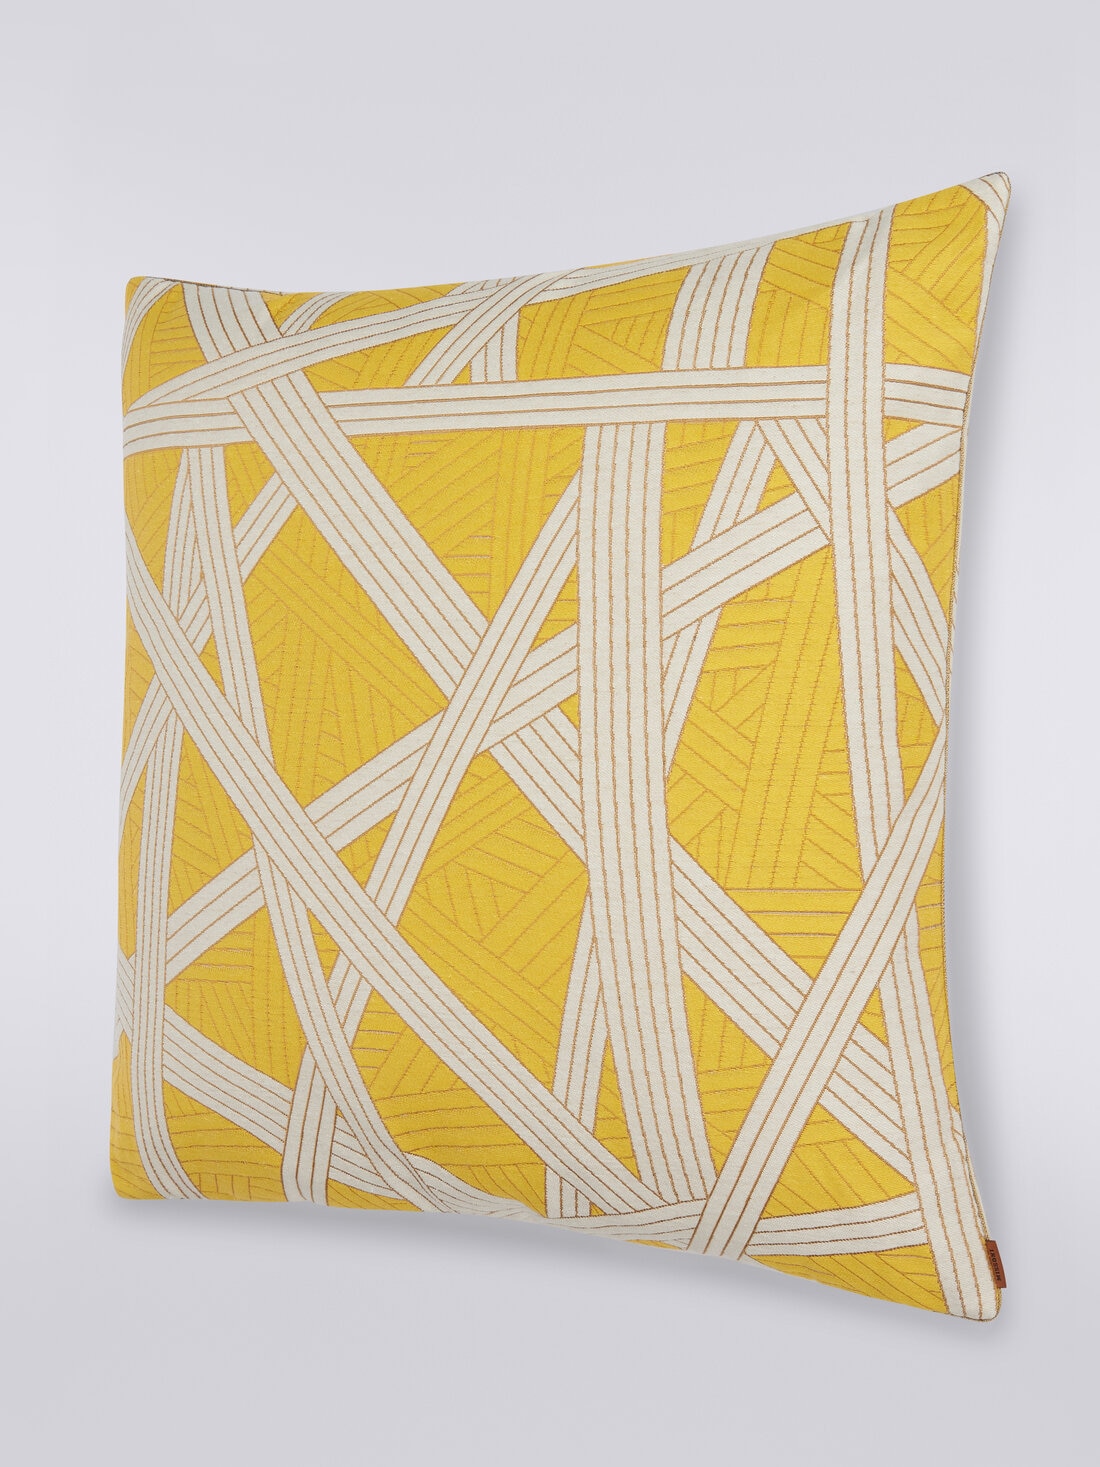 Nastri cushion 60x60 cm with contrasting stitching, Yellow  - 8051575837722 - 1